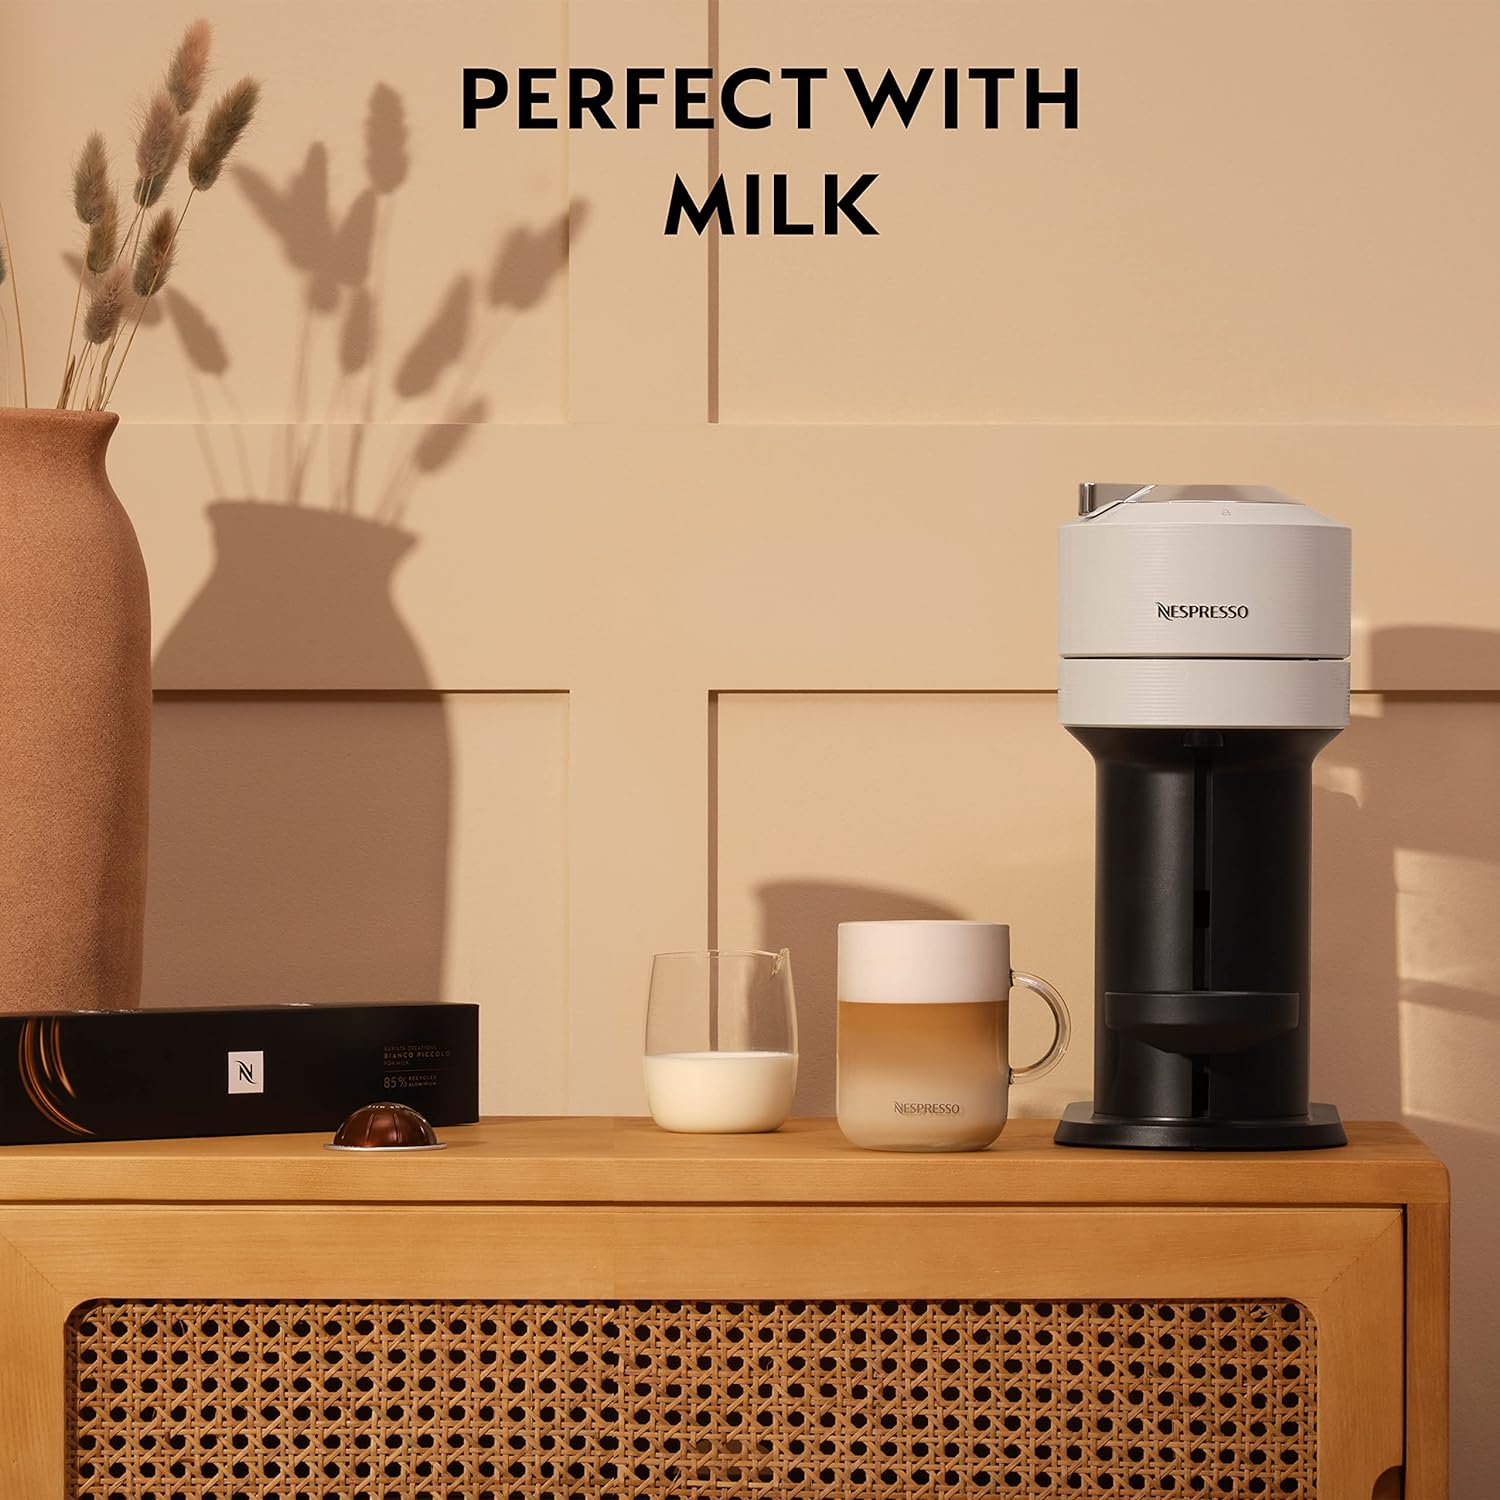 Nespresso Vertuo Next Automatic Pod Coffee Machine with Milk Frother for Espresso, Cappuccino and Latte by Magimix in Matt Black [Amazon Exclusive] - Amazing Gadgets Outlet